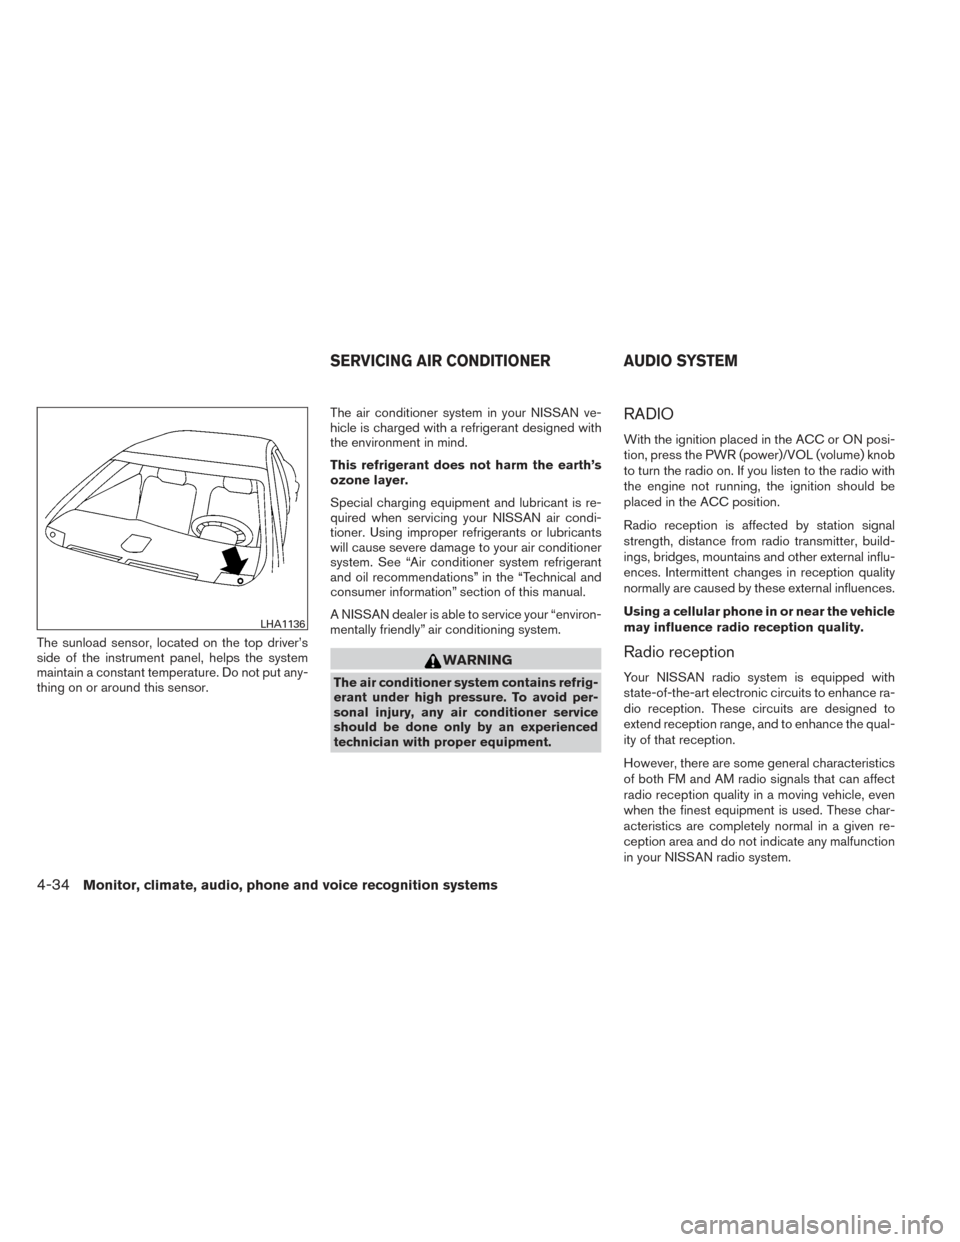 NISSAN ALTIMA 2014 L33 / 5.G Owners Manual The sunload sensor, located on the top driver’s
side of the instrument panel, helps the system
maintain a constant temperature. Do not put any-
thing on or around this sensor.The air conditioner sys